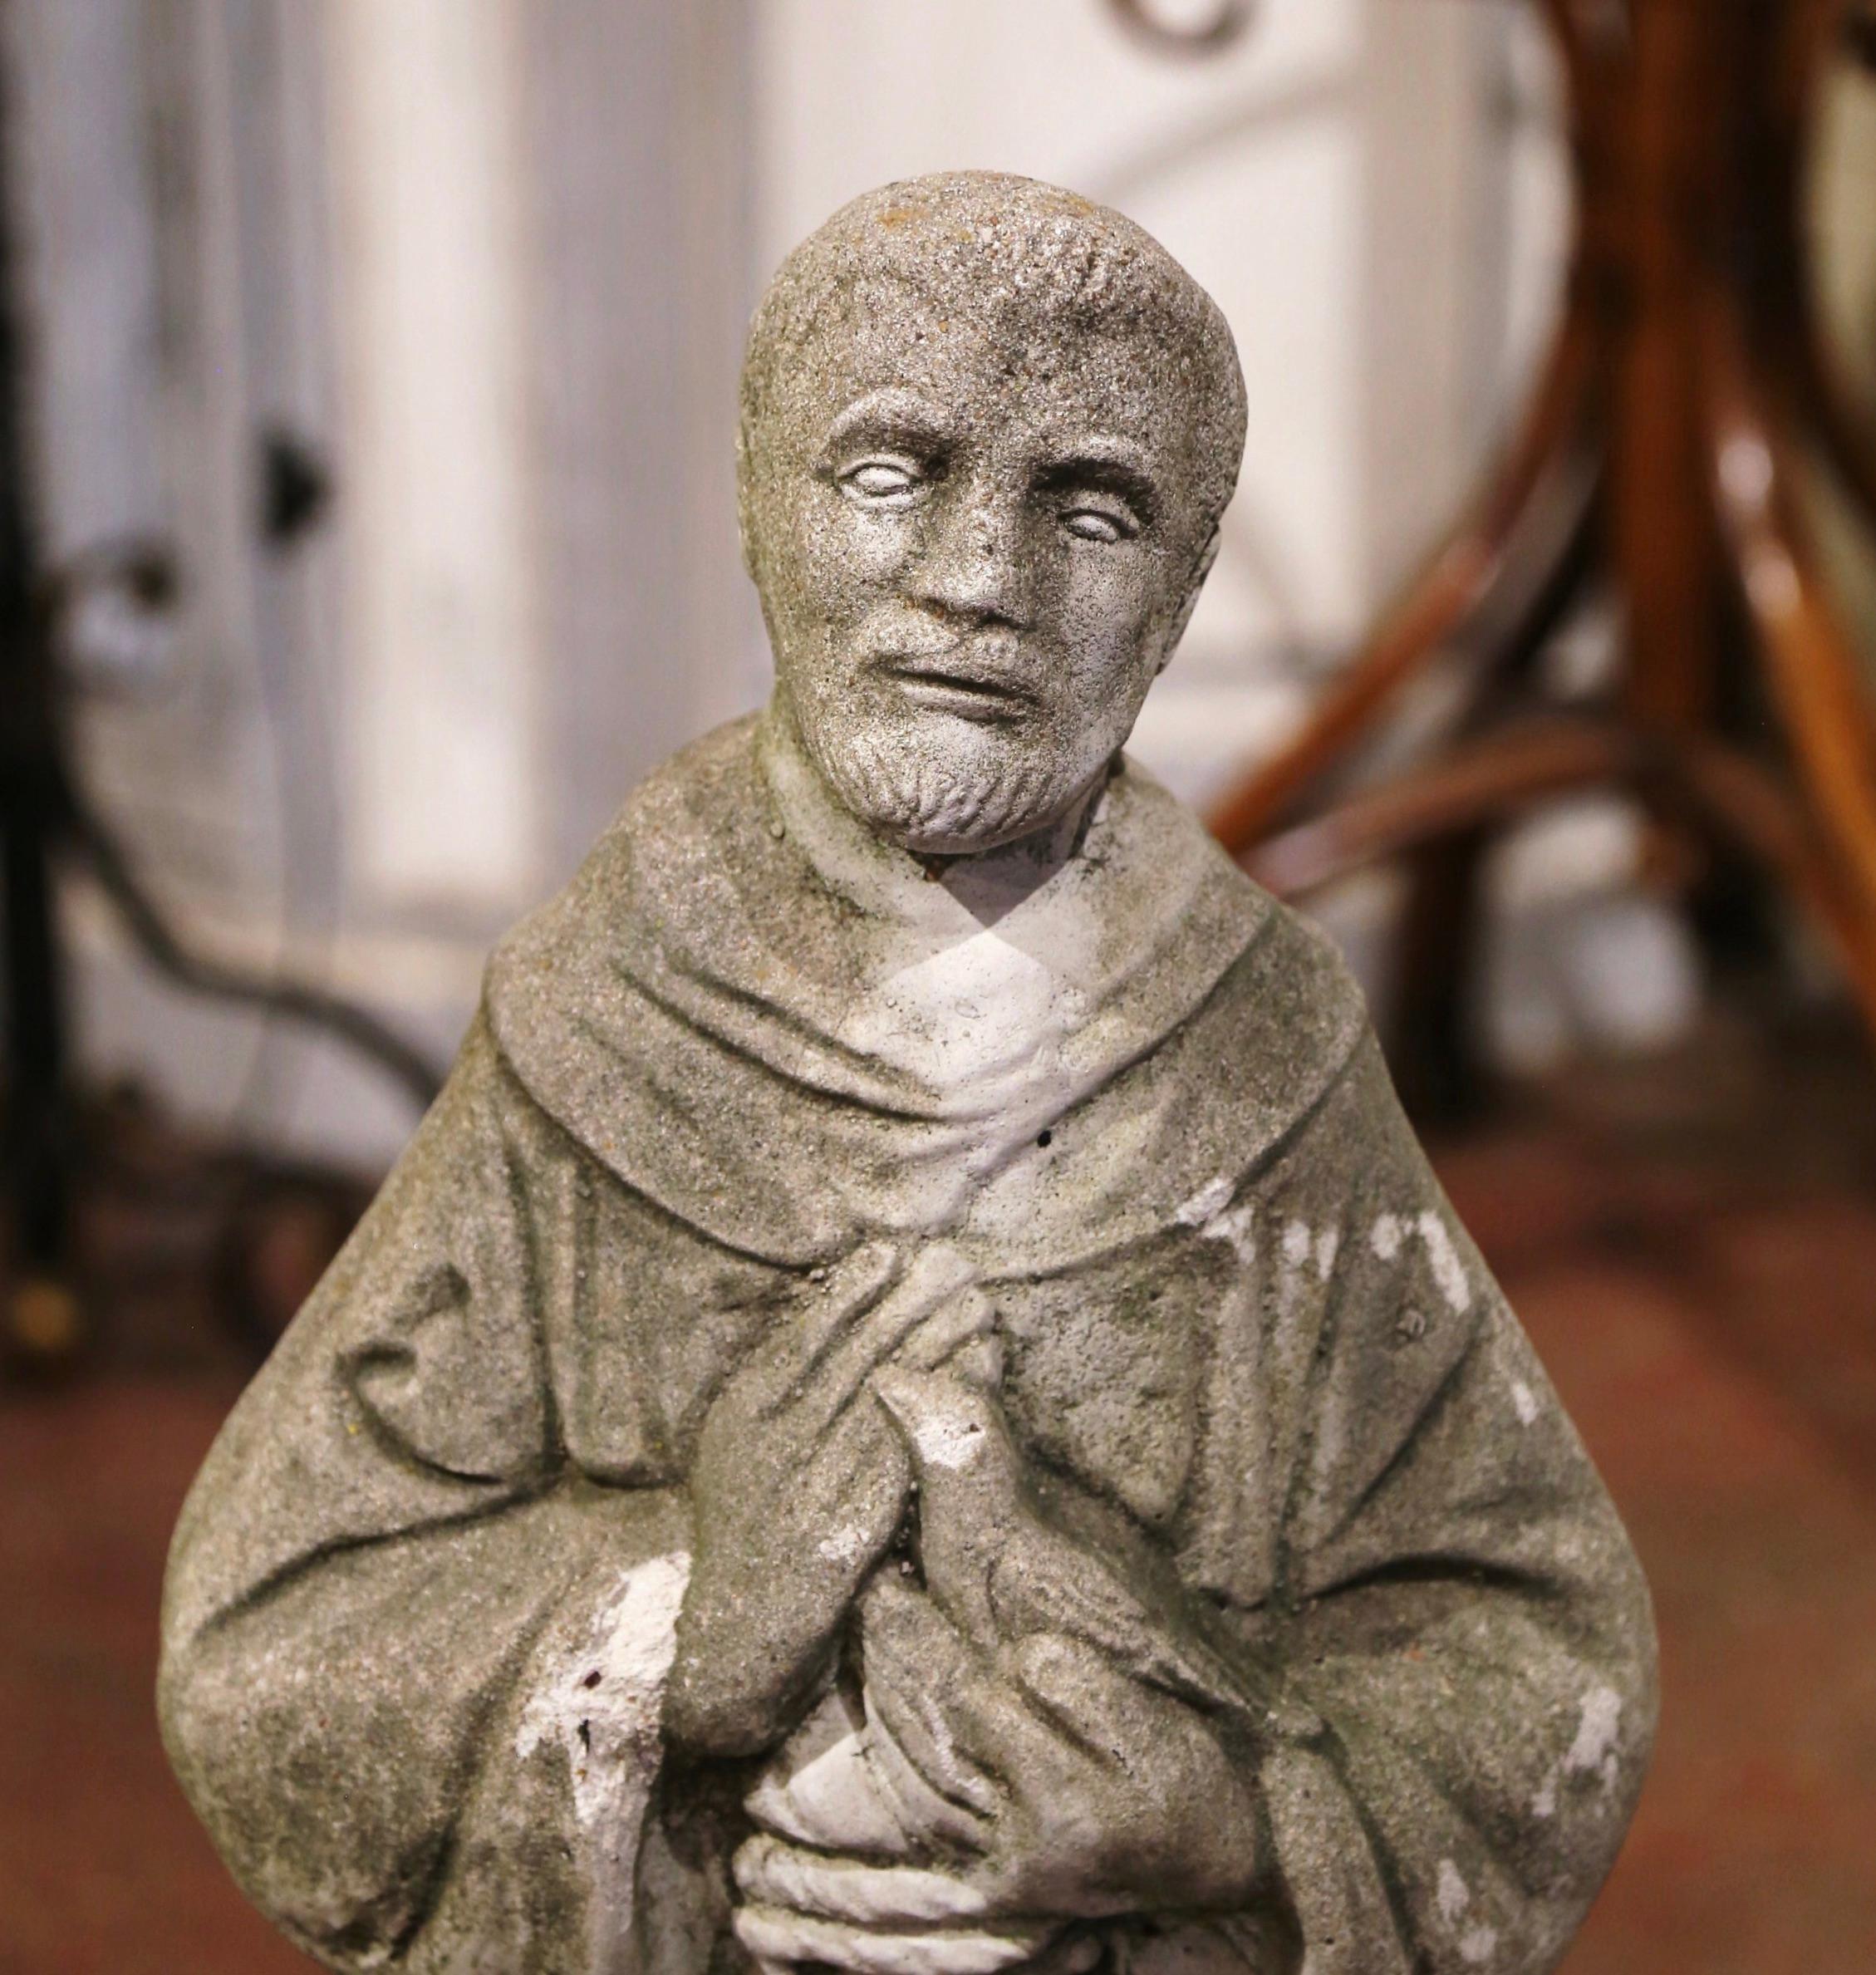 Decorate an outdoor garden with this antique statue of Saint Francis, the saint patron of animals; crafted in France circa 1880, the carved statue stands on a round base and features the Saint dressed in cassock, holding a dove in his hands, and